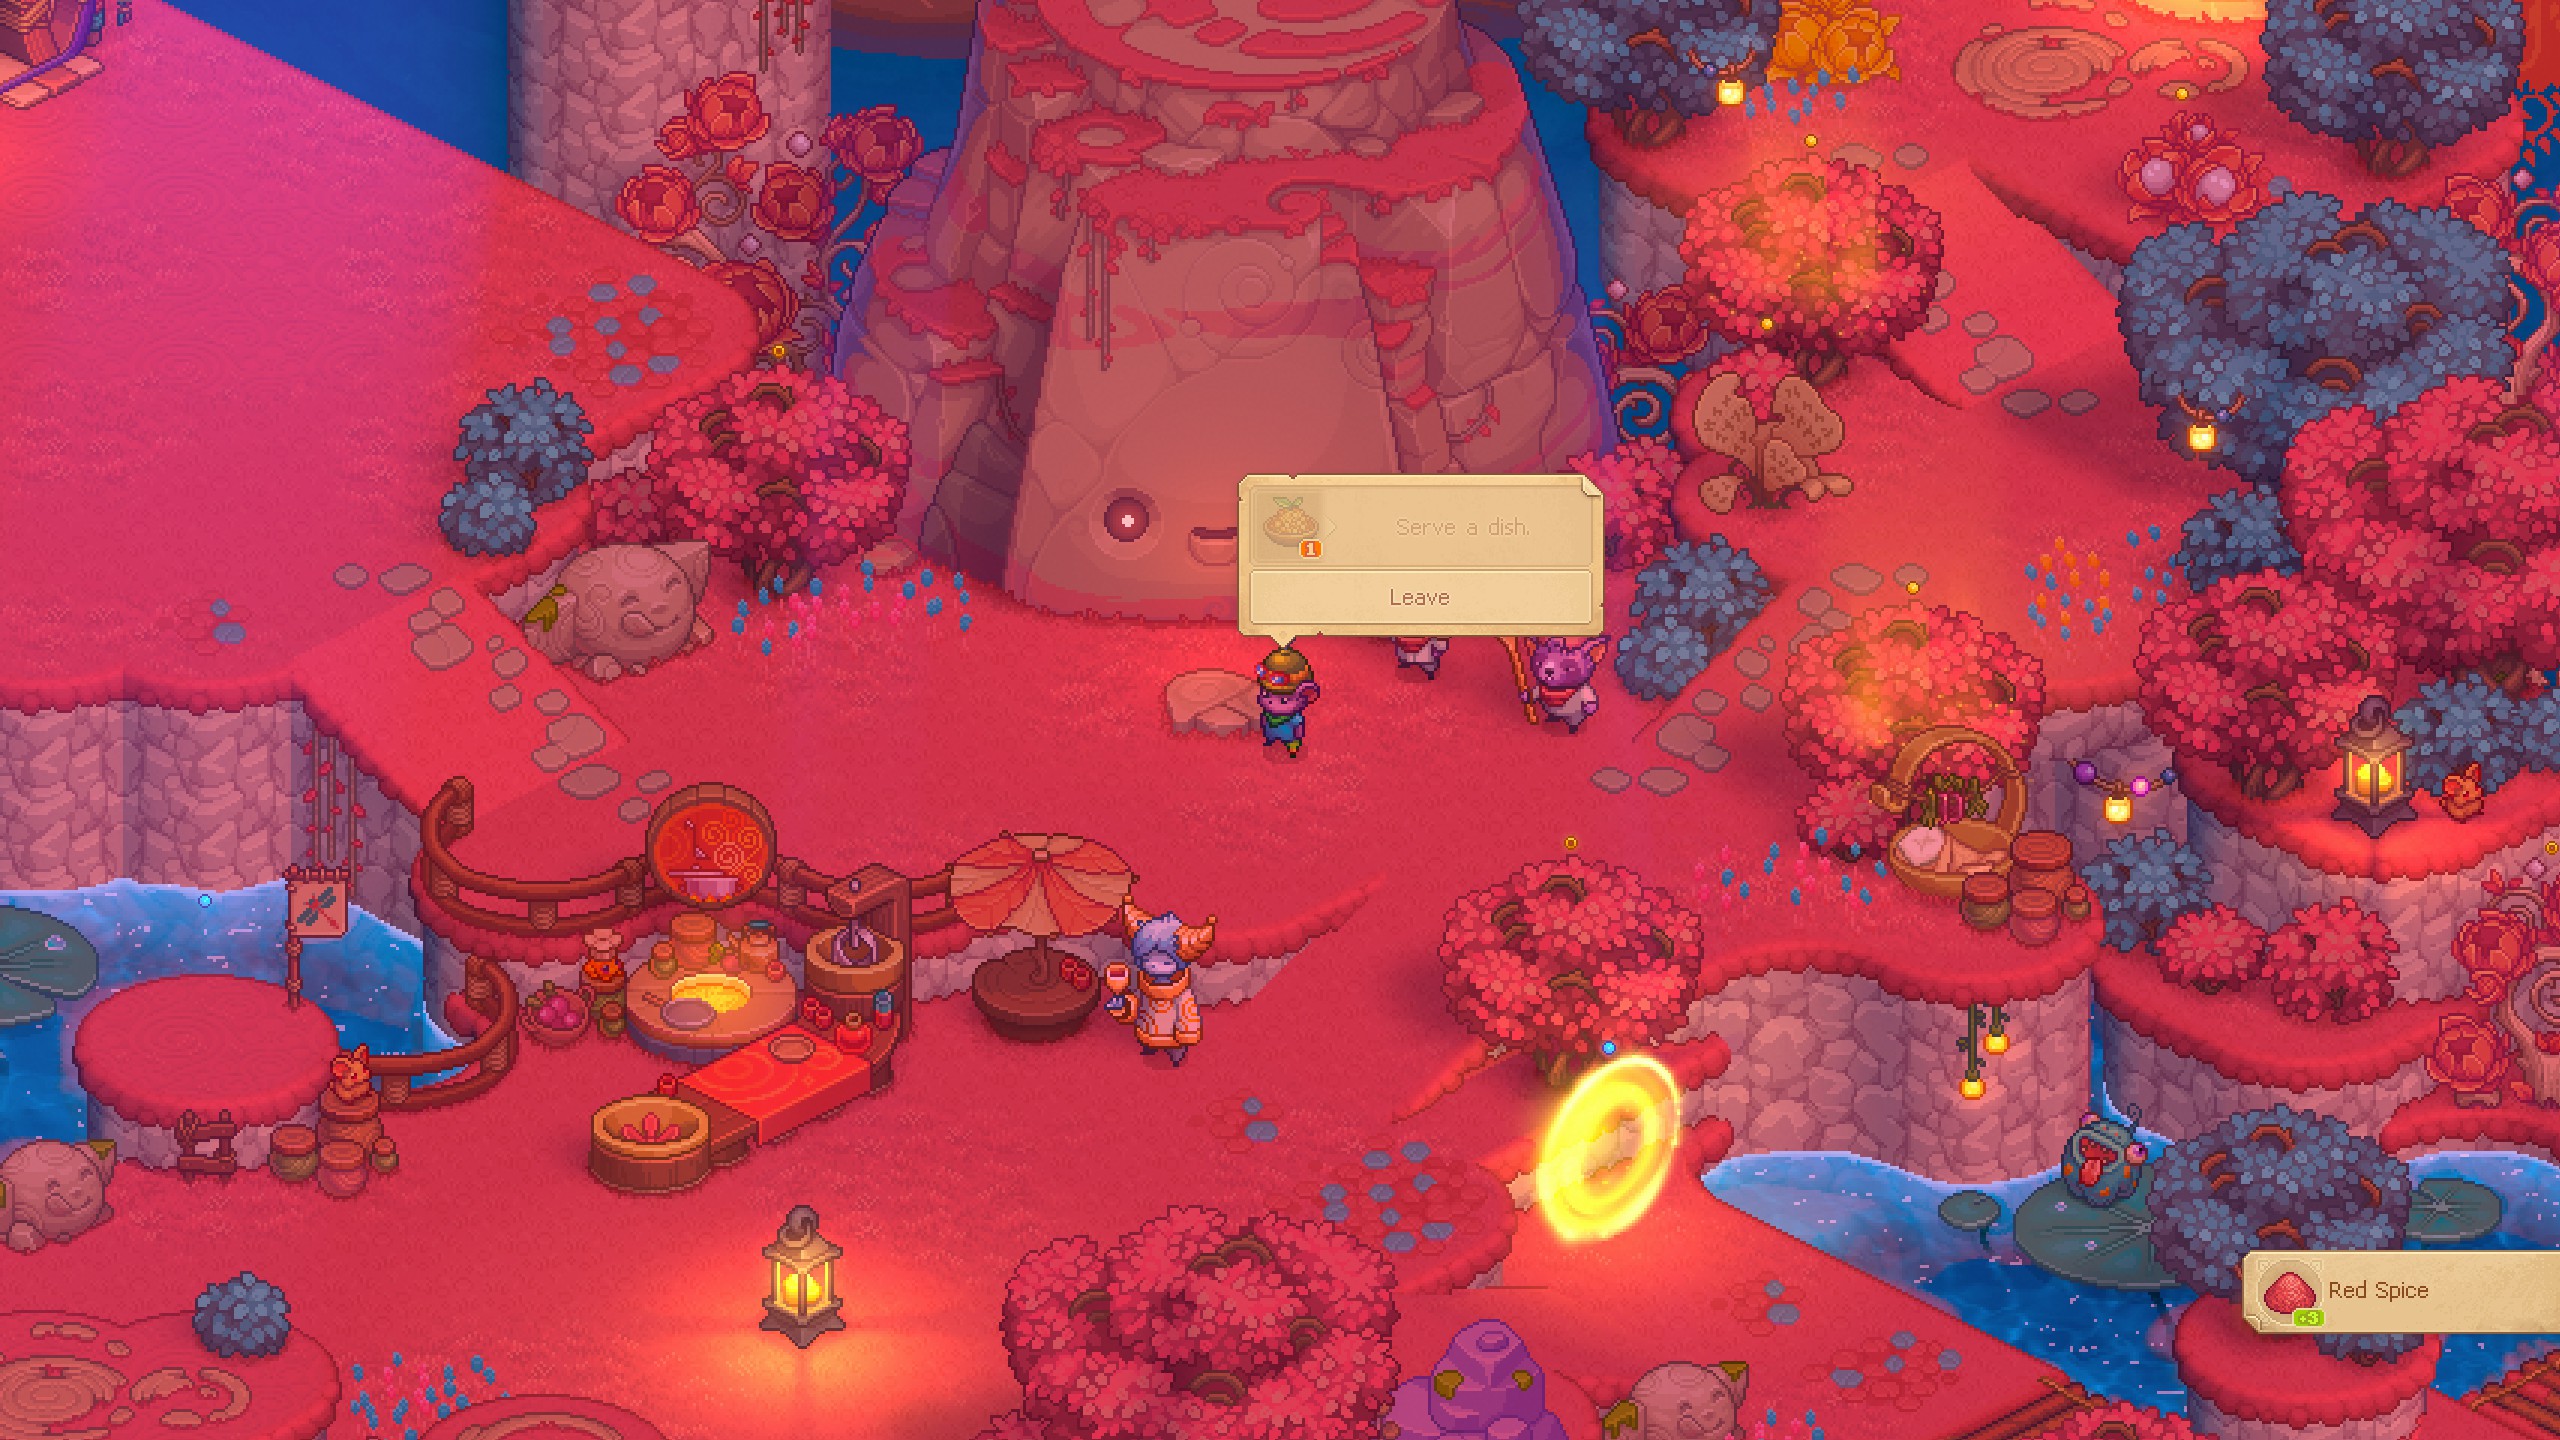 bandle tale review - riot's schattigste game